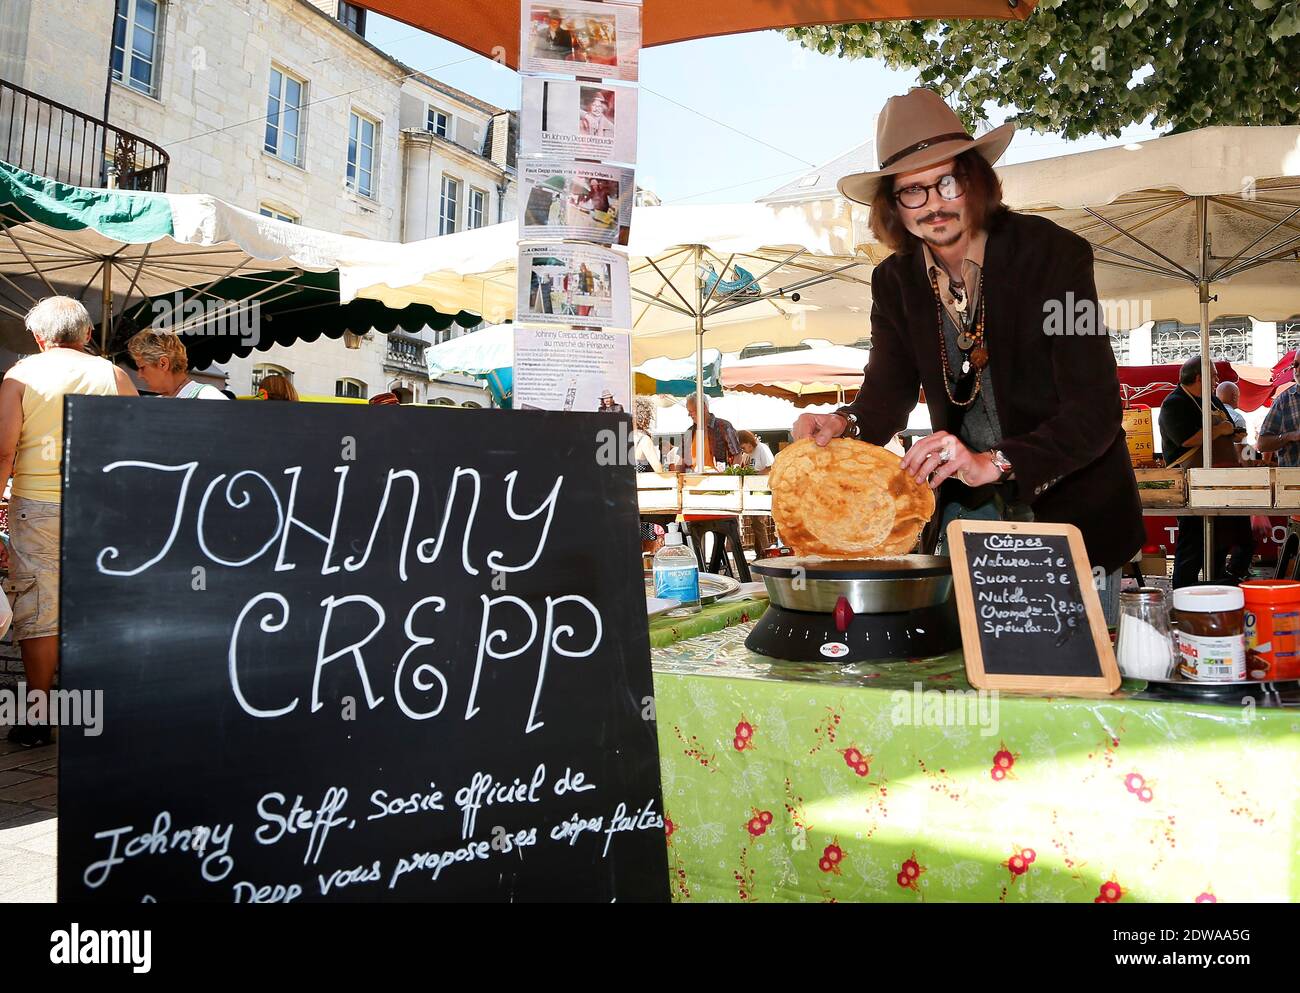 Exclusive - French Johnny Depp look-alike, Stephane Cons, also called Johnny Steff, just launched a new culinary activity in the South of France. In many different regional local markets, and especially in Perigueux, Cons runs a Crepes (pancakes) stand under the brand name 'Johnny Crepp'. For a year now, this former plants seller (in a garden center) changed his life to become the French Depp's look-a-like. Similar to Johnny Depp, Stephane Cons, 46, decided to make competitions, to audition roles, etc.. After some time, Cons figured out that he was the only official Depp's sosie in France. Joh Stock Photo